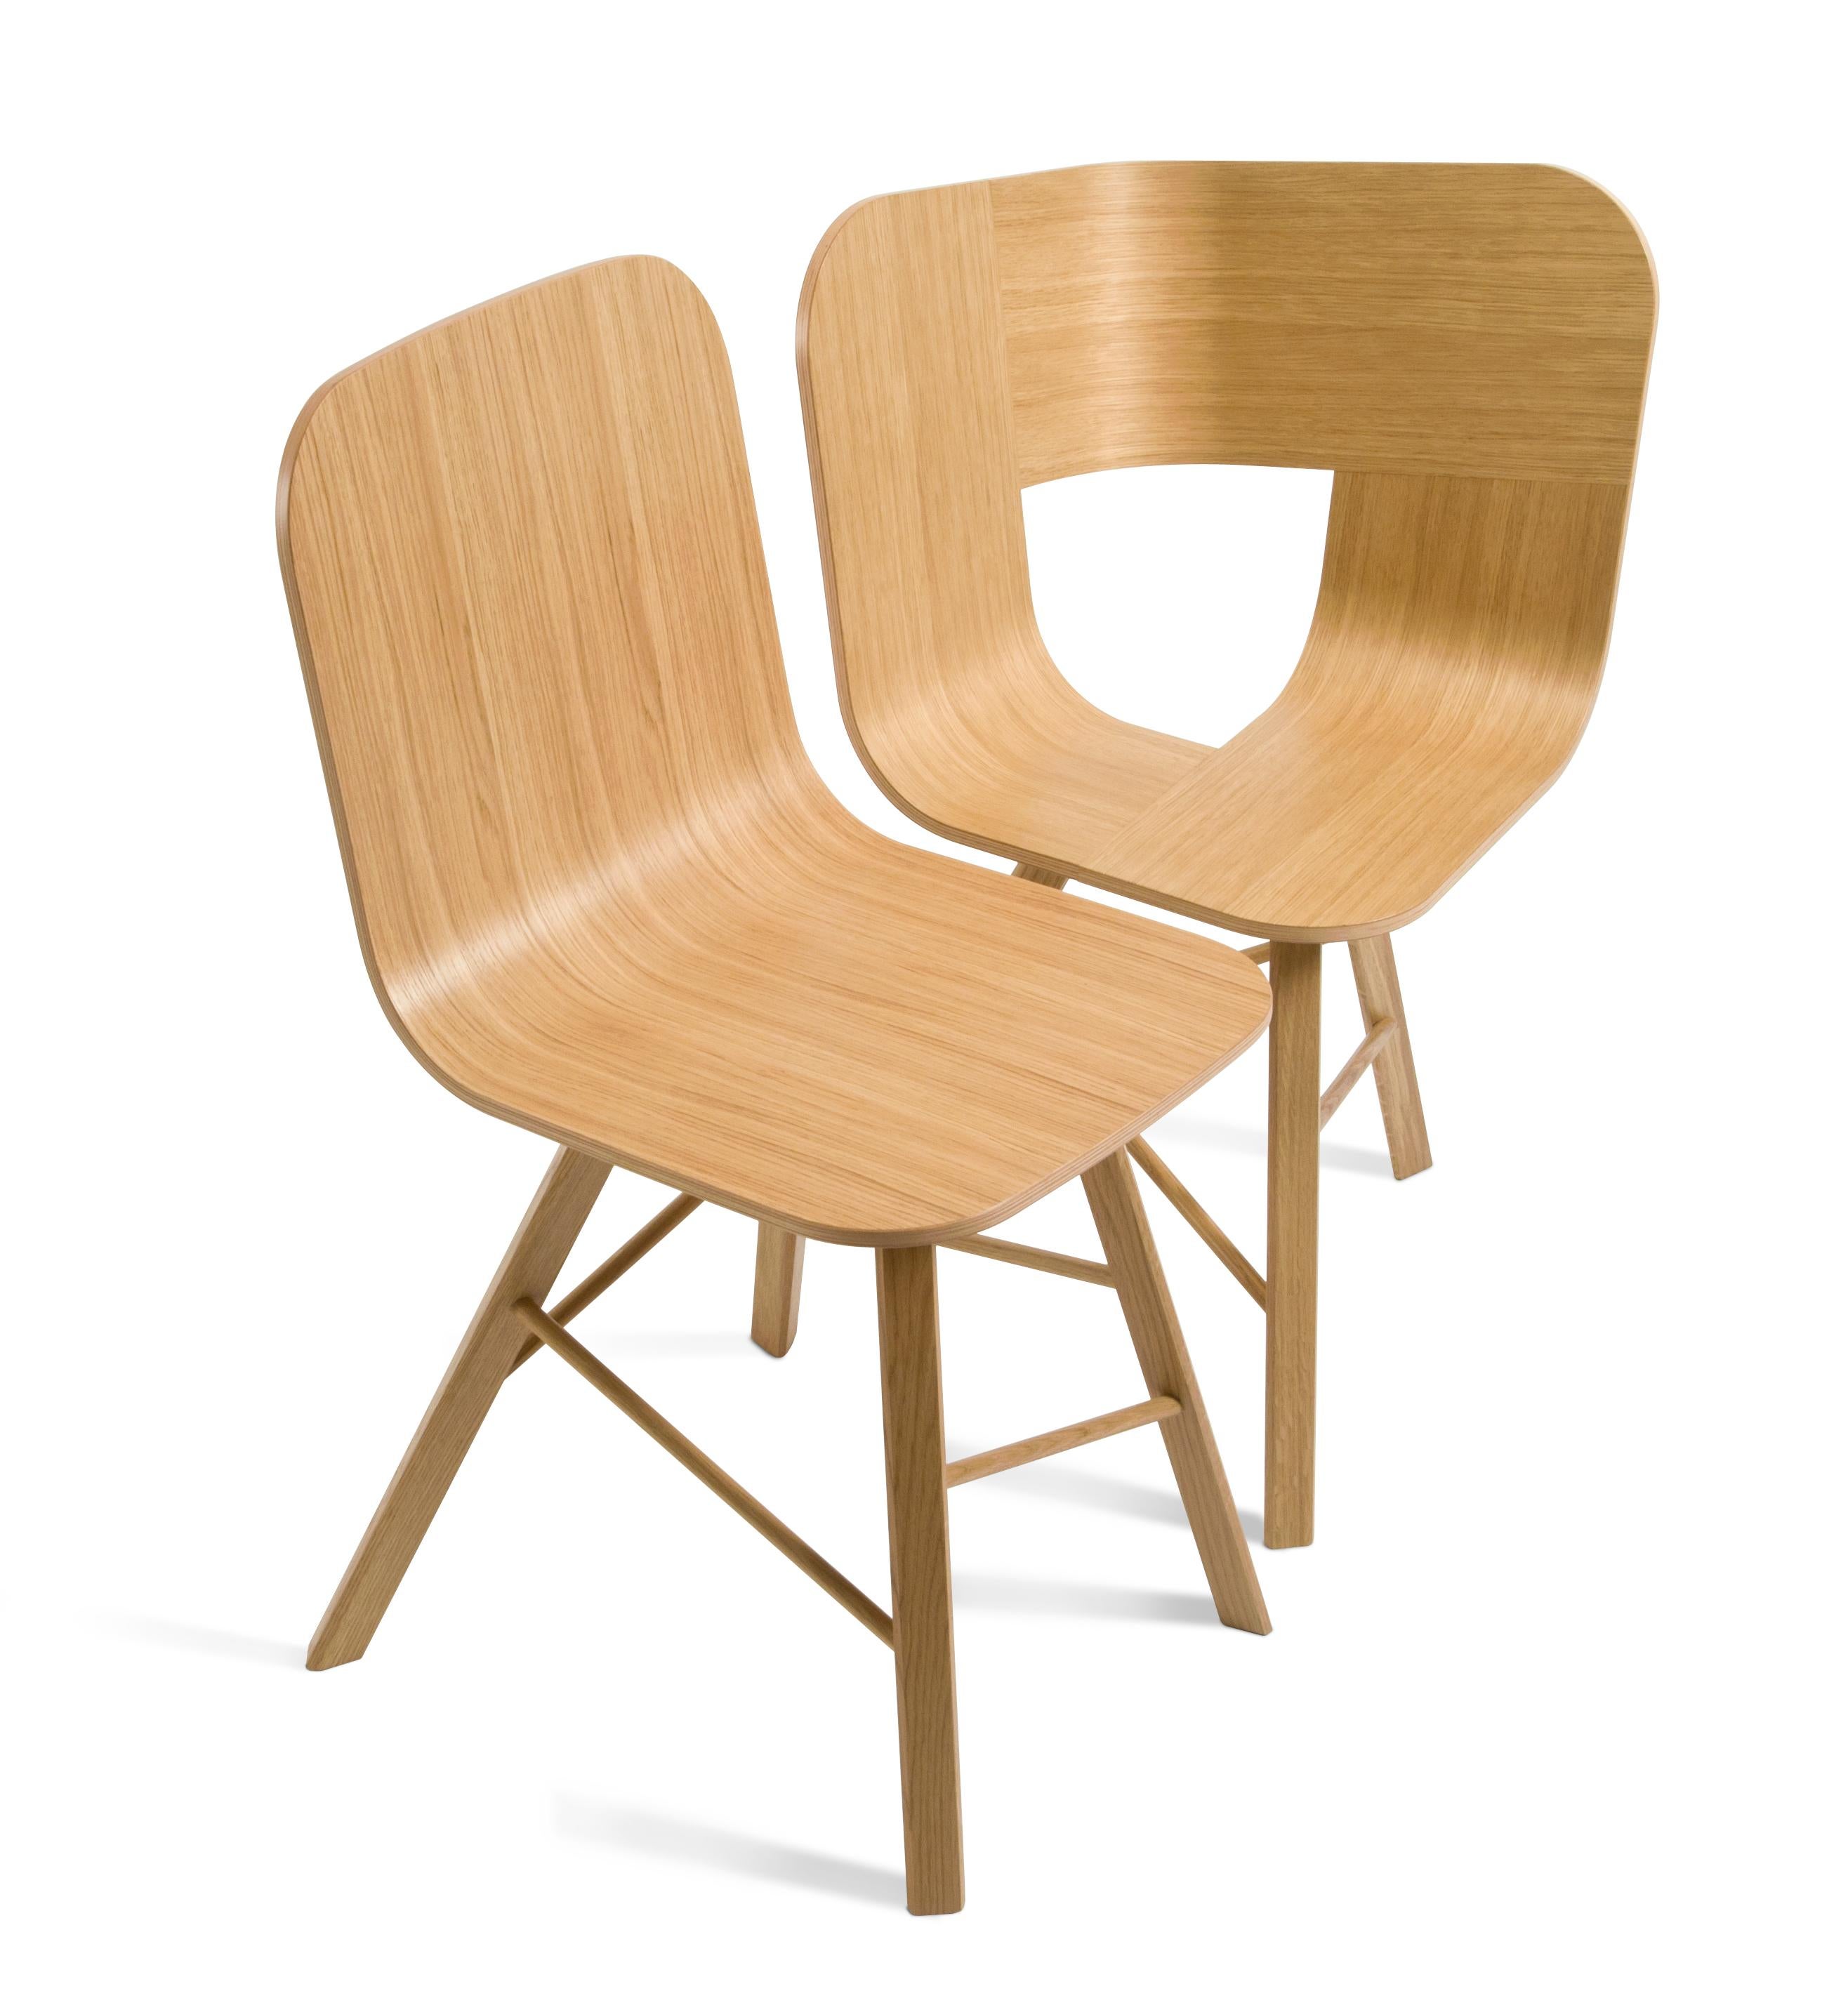 Essential and elegant chair with a bent plywood shell, and four iconic legs with triangular shape in solid oak, joined by transversal wooden bars.
The shel is available in two different variations: Wood veneered (natural oak or stained open pore in